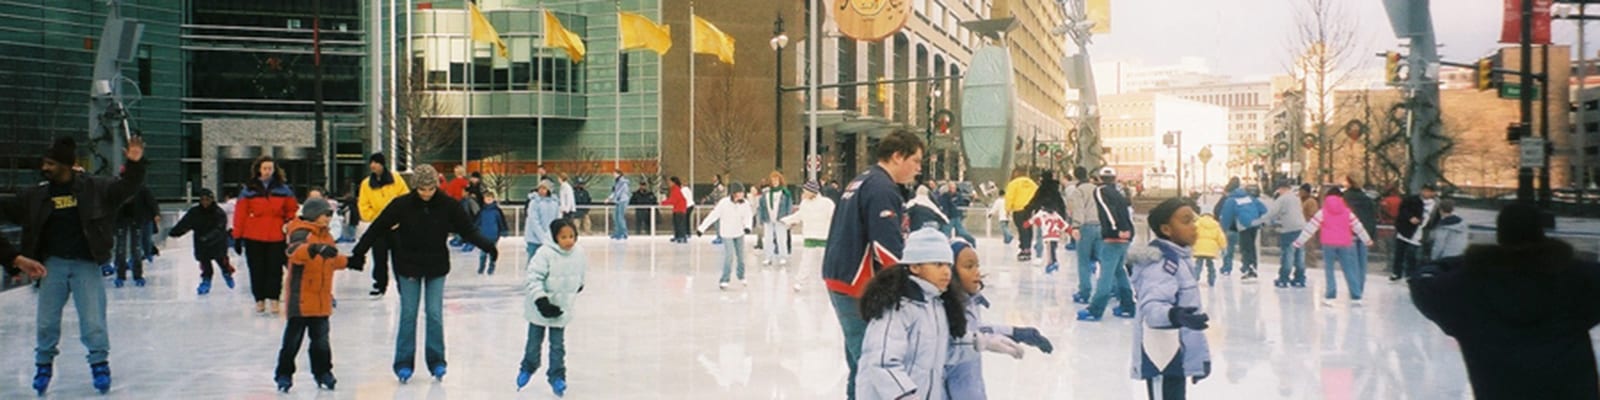 Photo of people skating on an outdoor city rink.